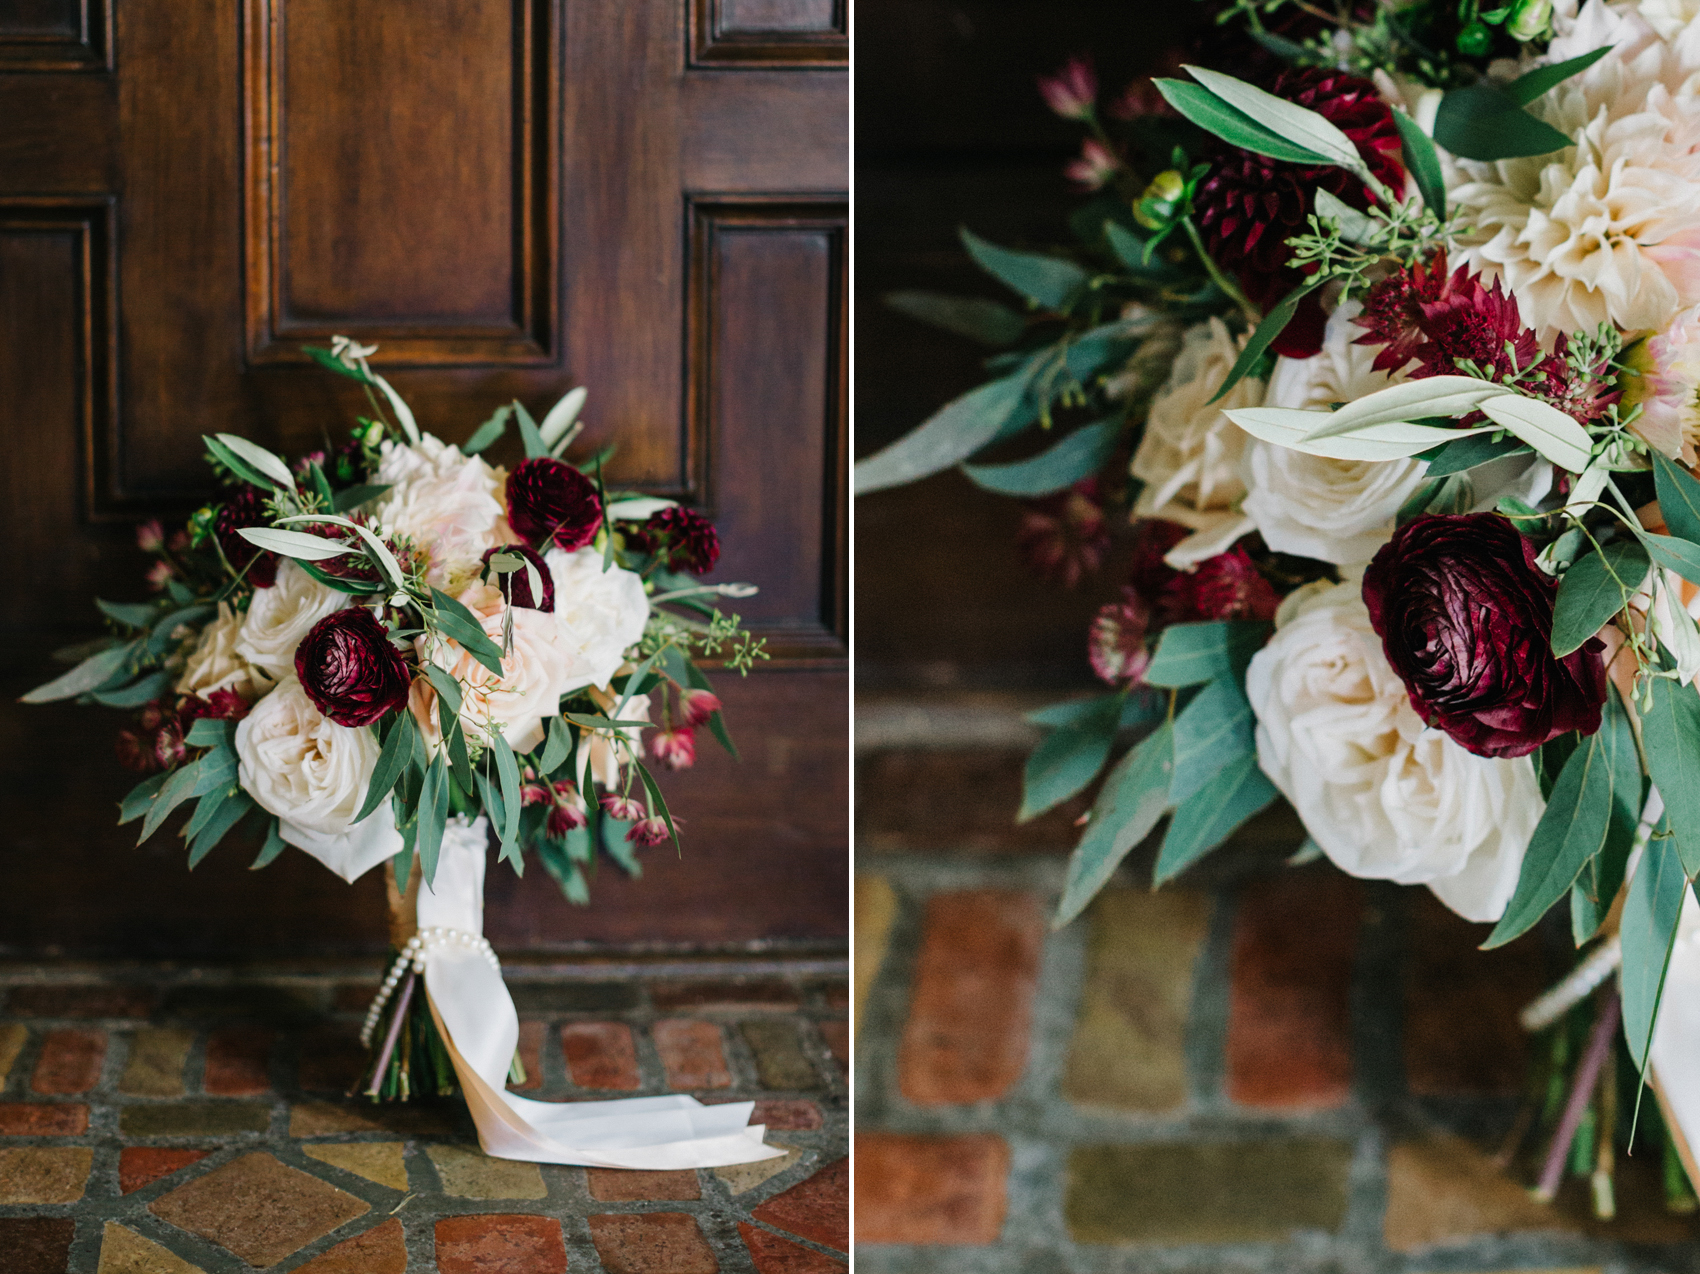 Lush organic bridal bouquet with greenery and maroon blooms